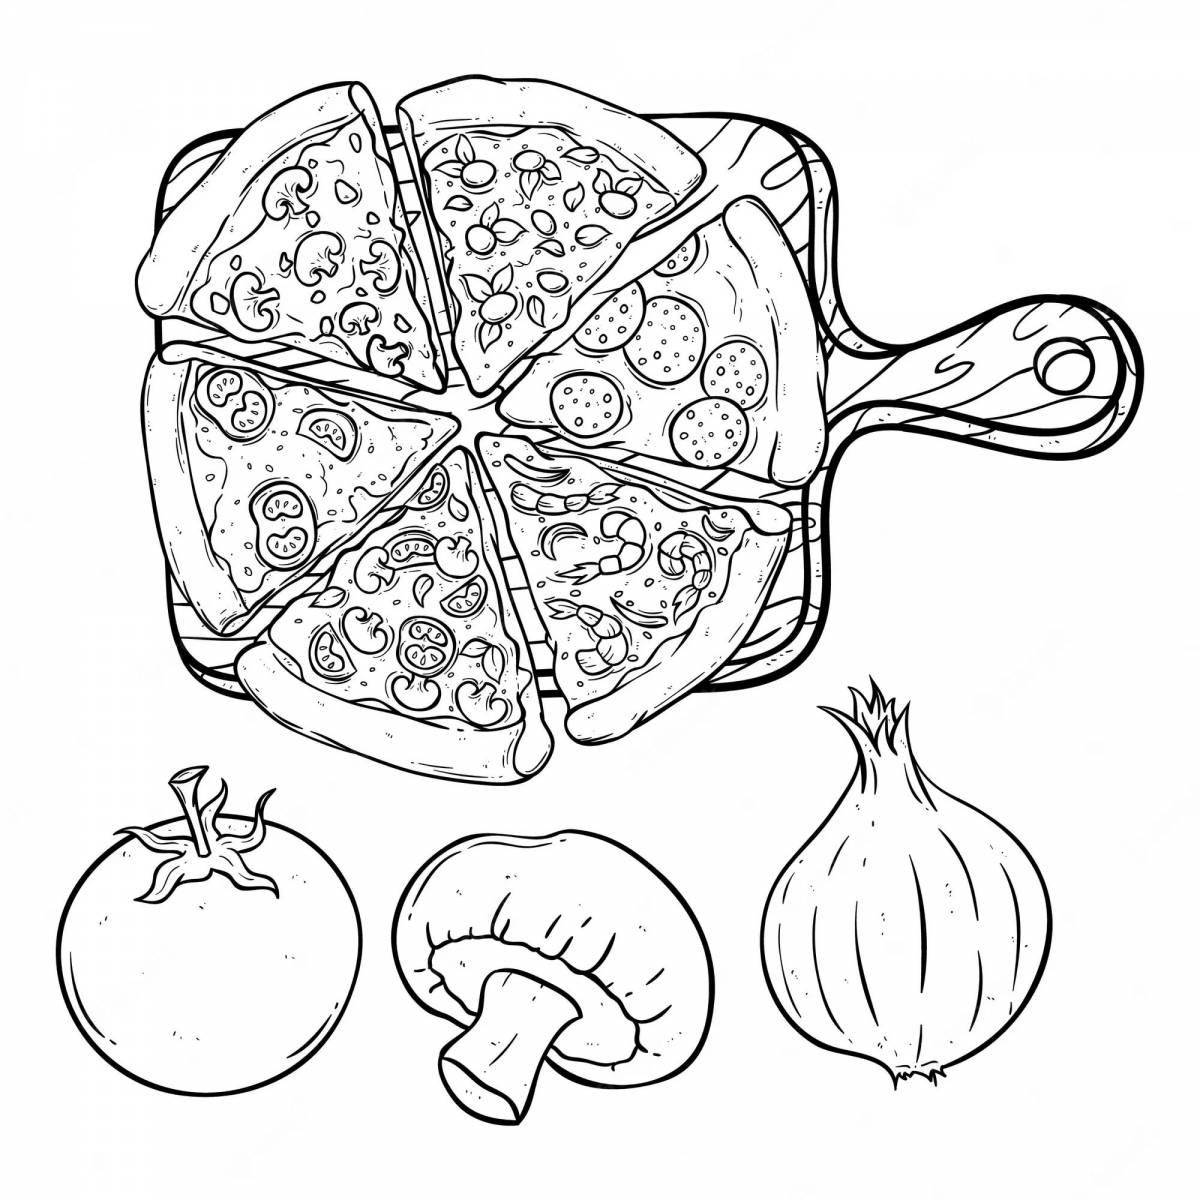 Great pizza ingredients coloring book